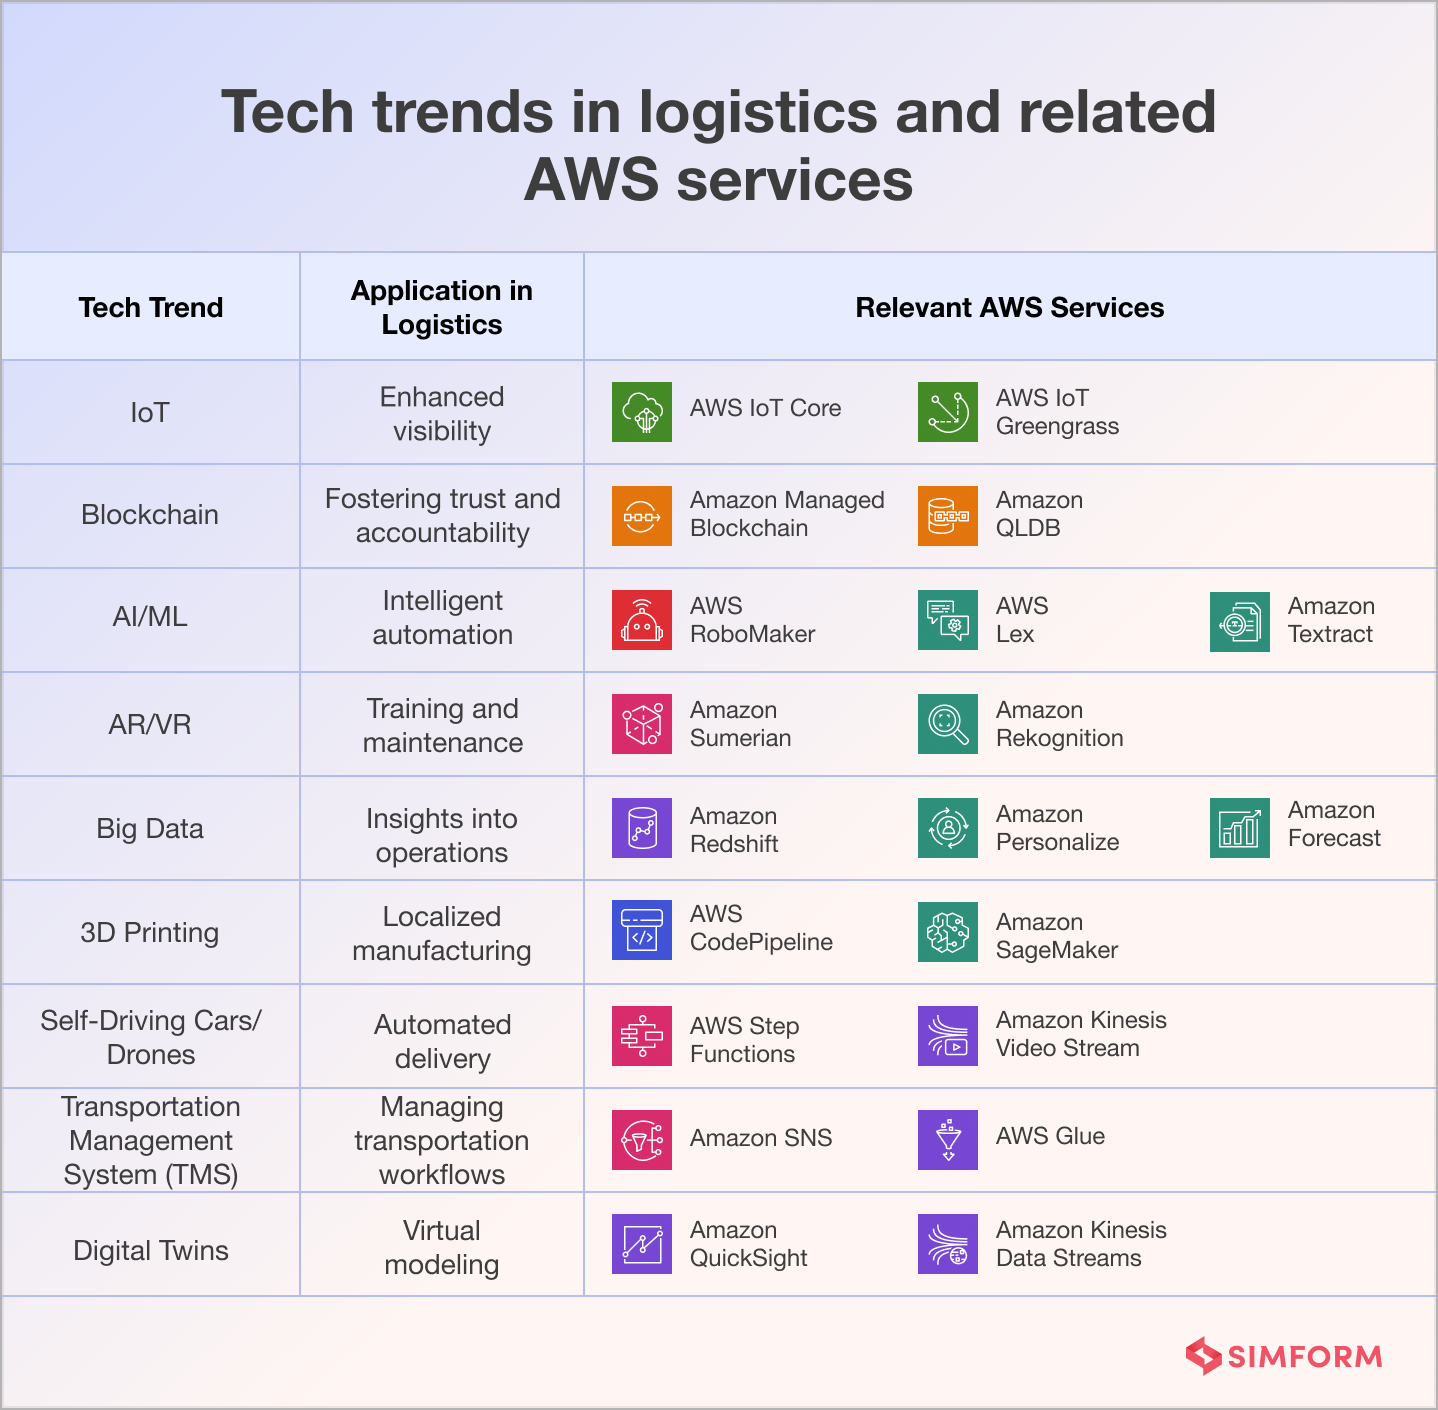 Top Tech Trends in Logistics AWS Services